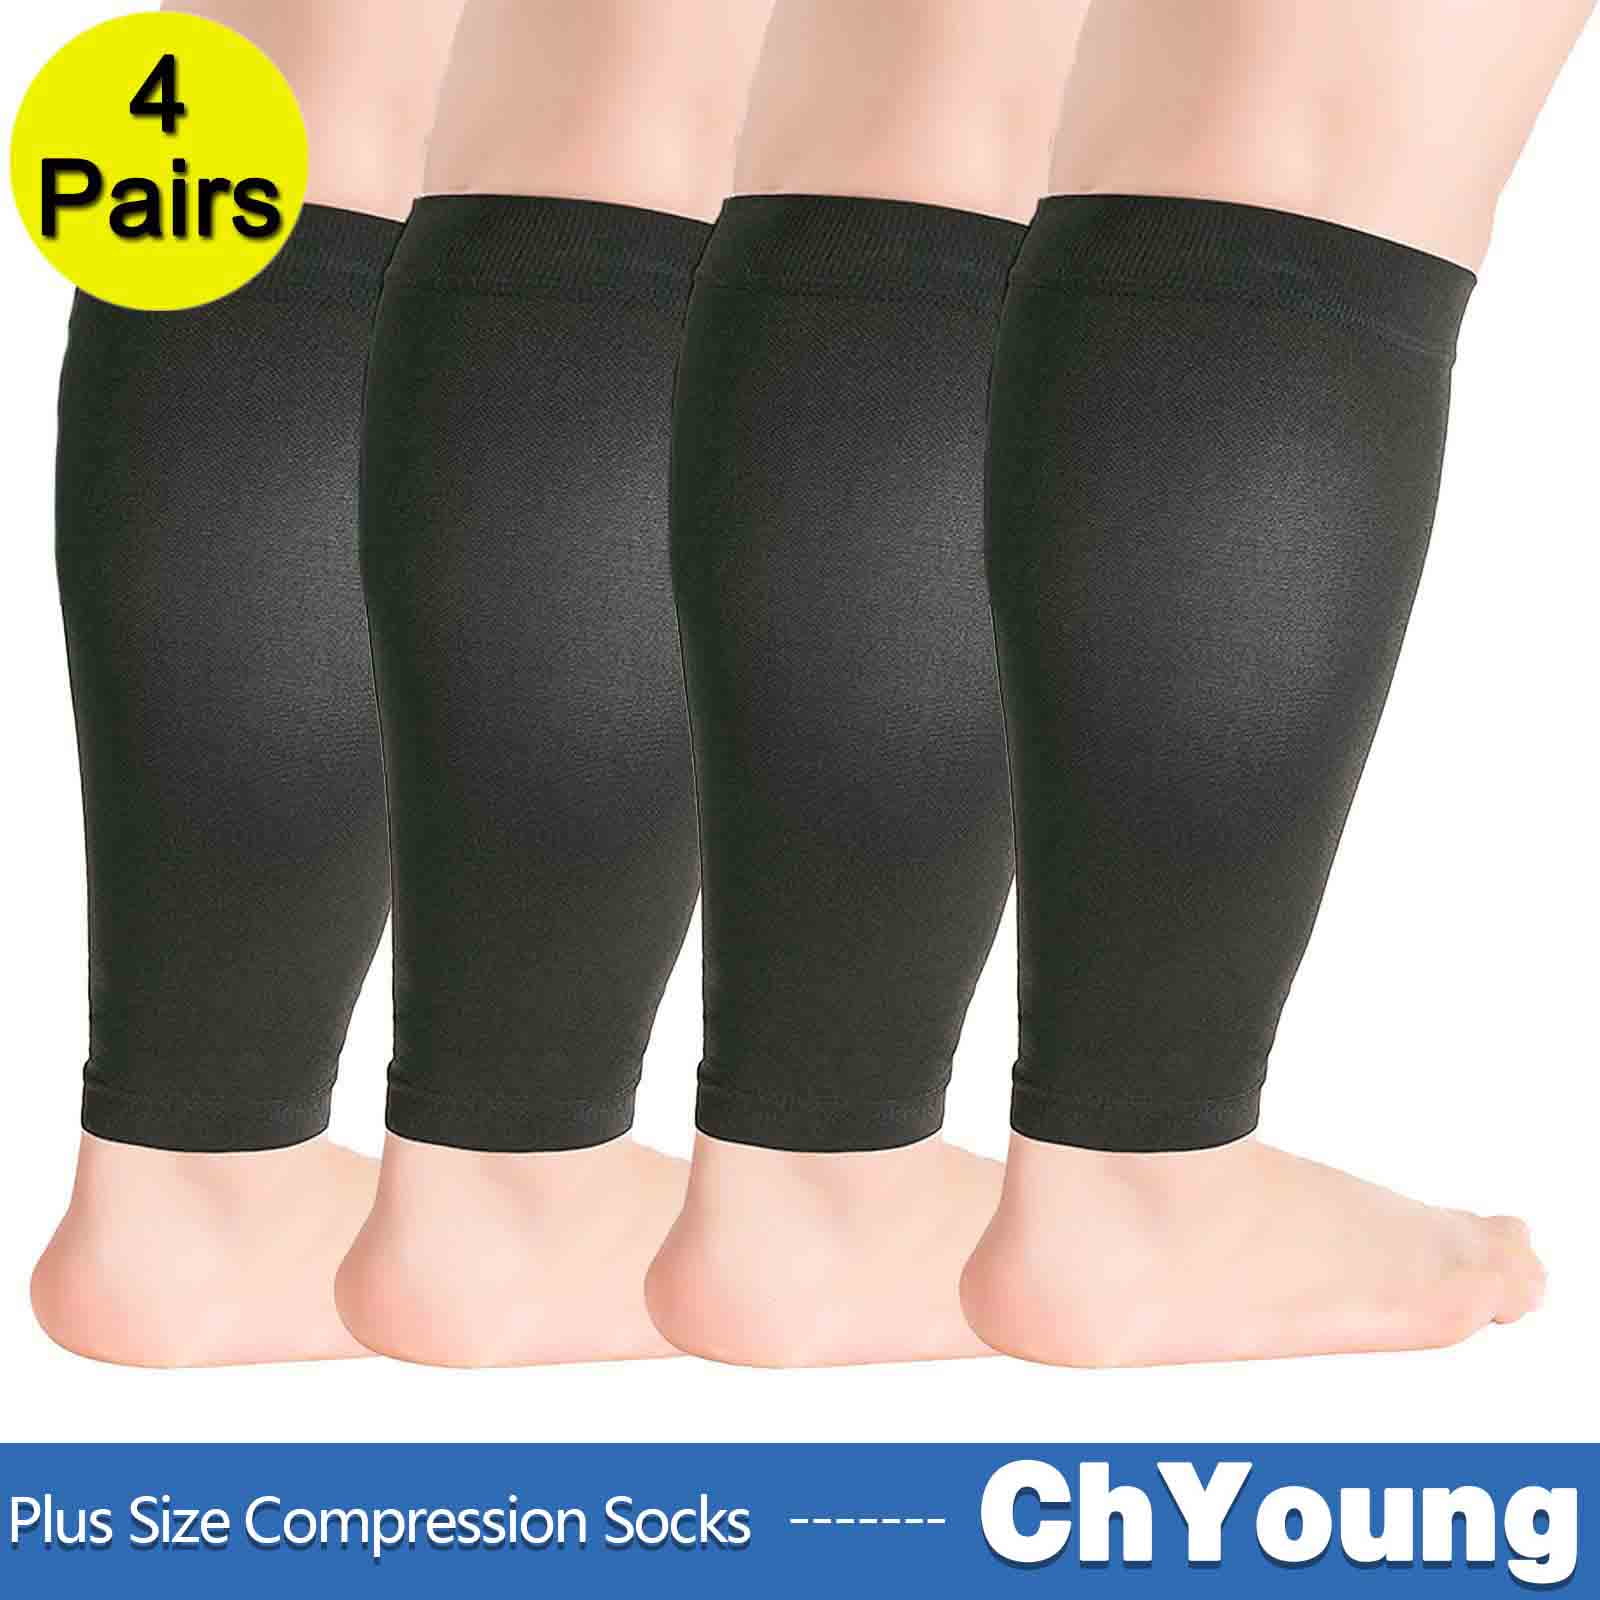 5Pack 3XL Extra Wide Calf Compression Stockings for Women & Men, Plus Size  Compression Sleeve Socks 20-30 mmHg, Knee High Toeless to Prevent Swelling,  Pain 